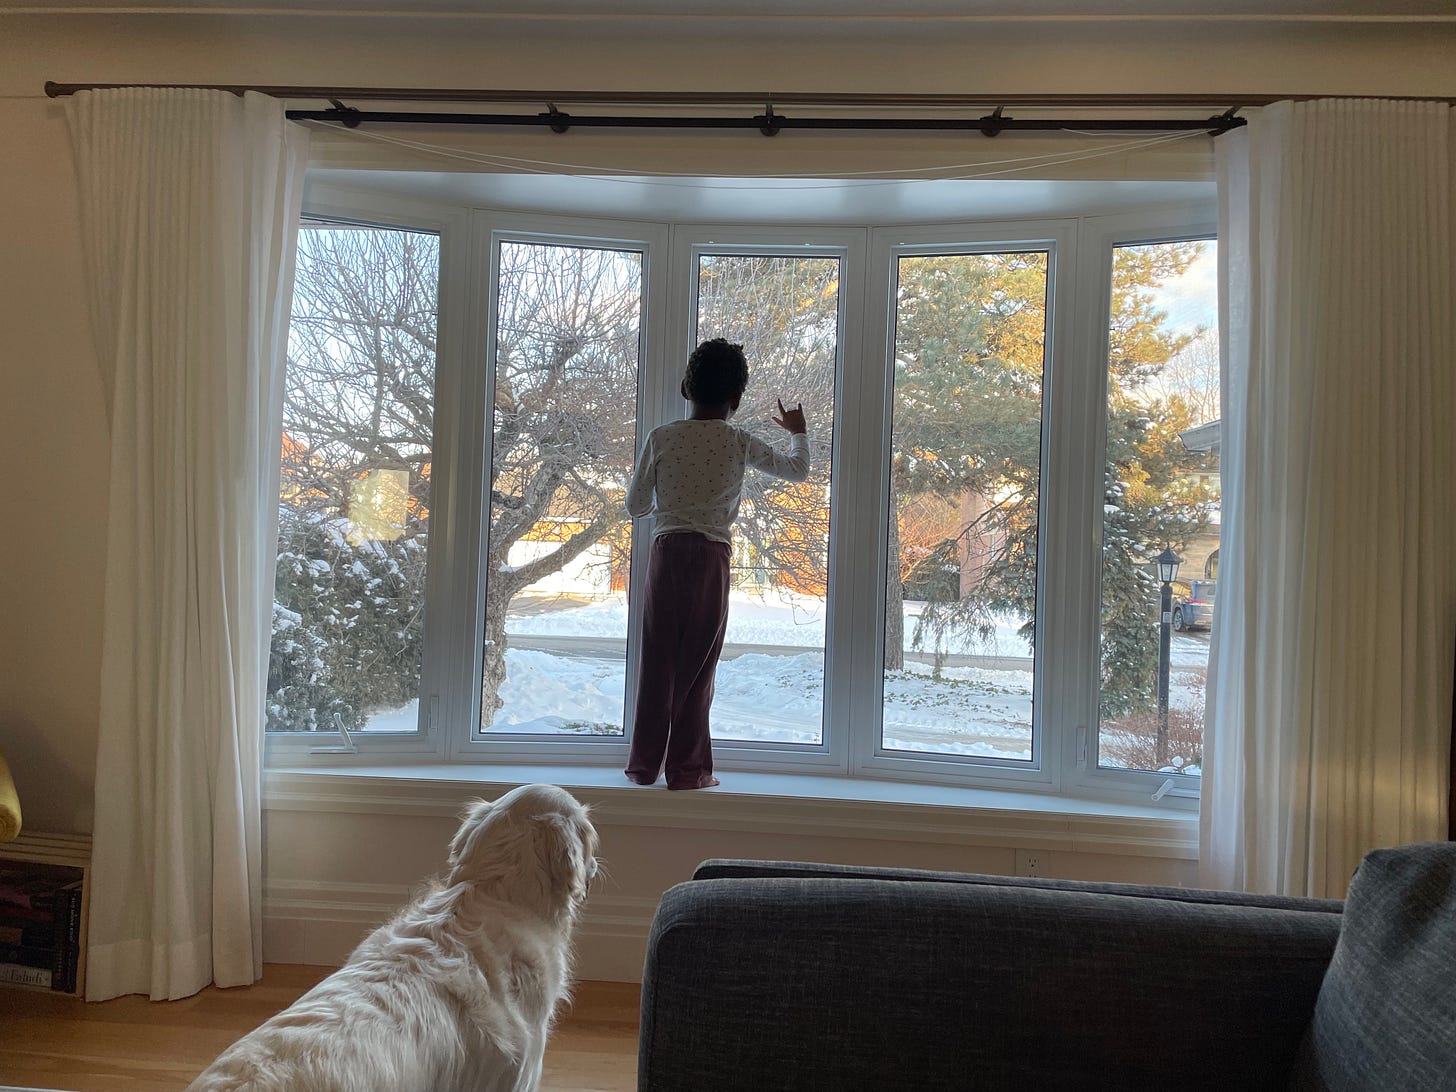 A Black kid, Khalil looks out a window and holds up the ASL sign for I love you. A golden retriever looks on.